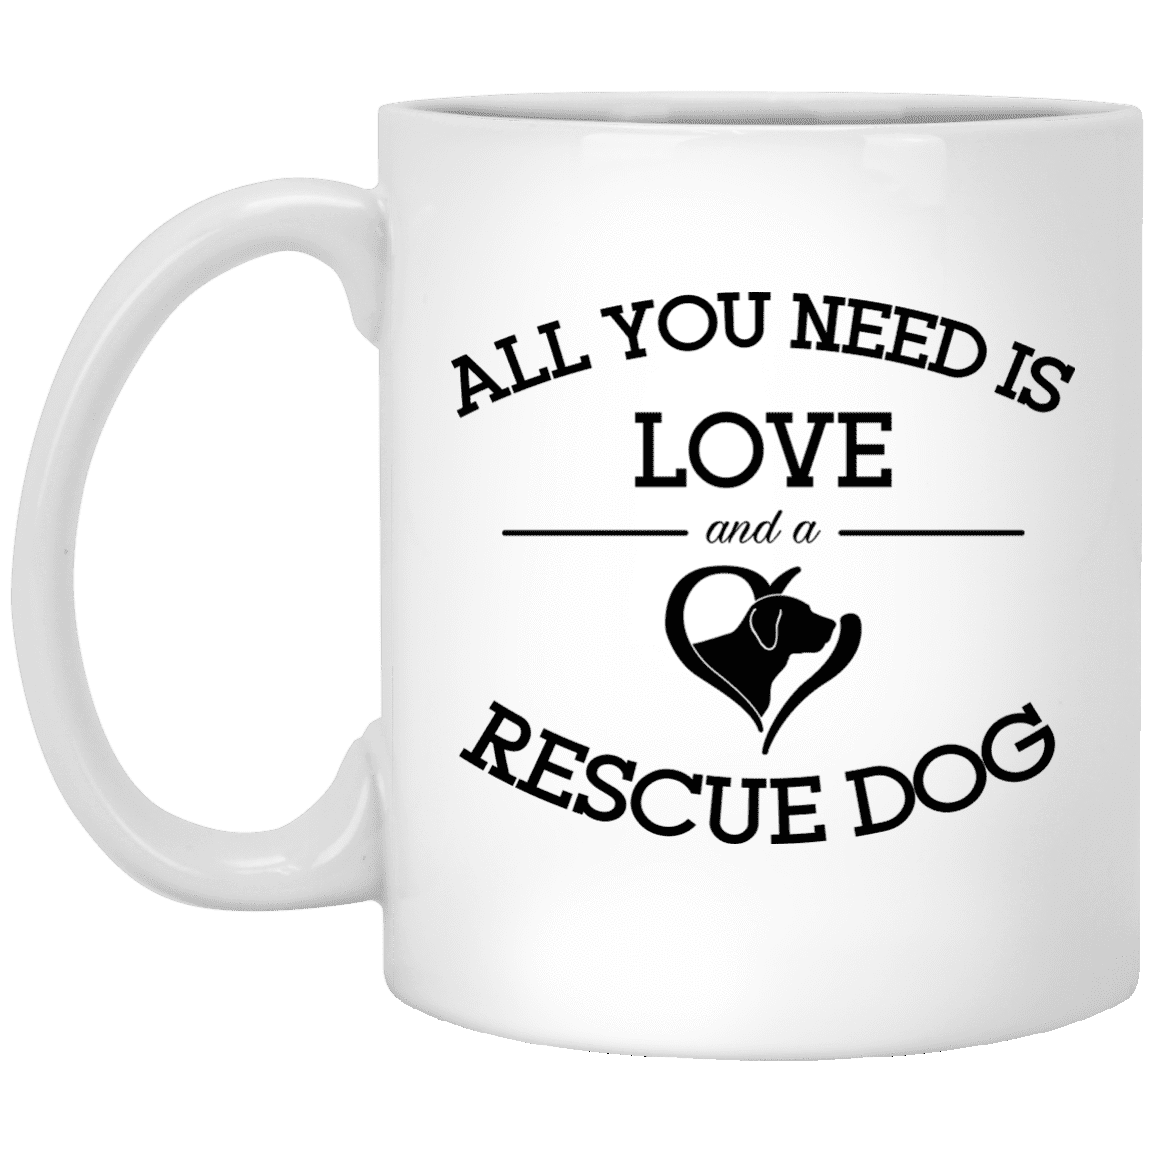 Love and a Rescue Dog - Mugs.